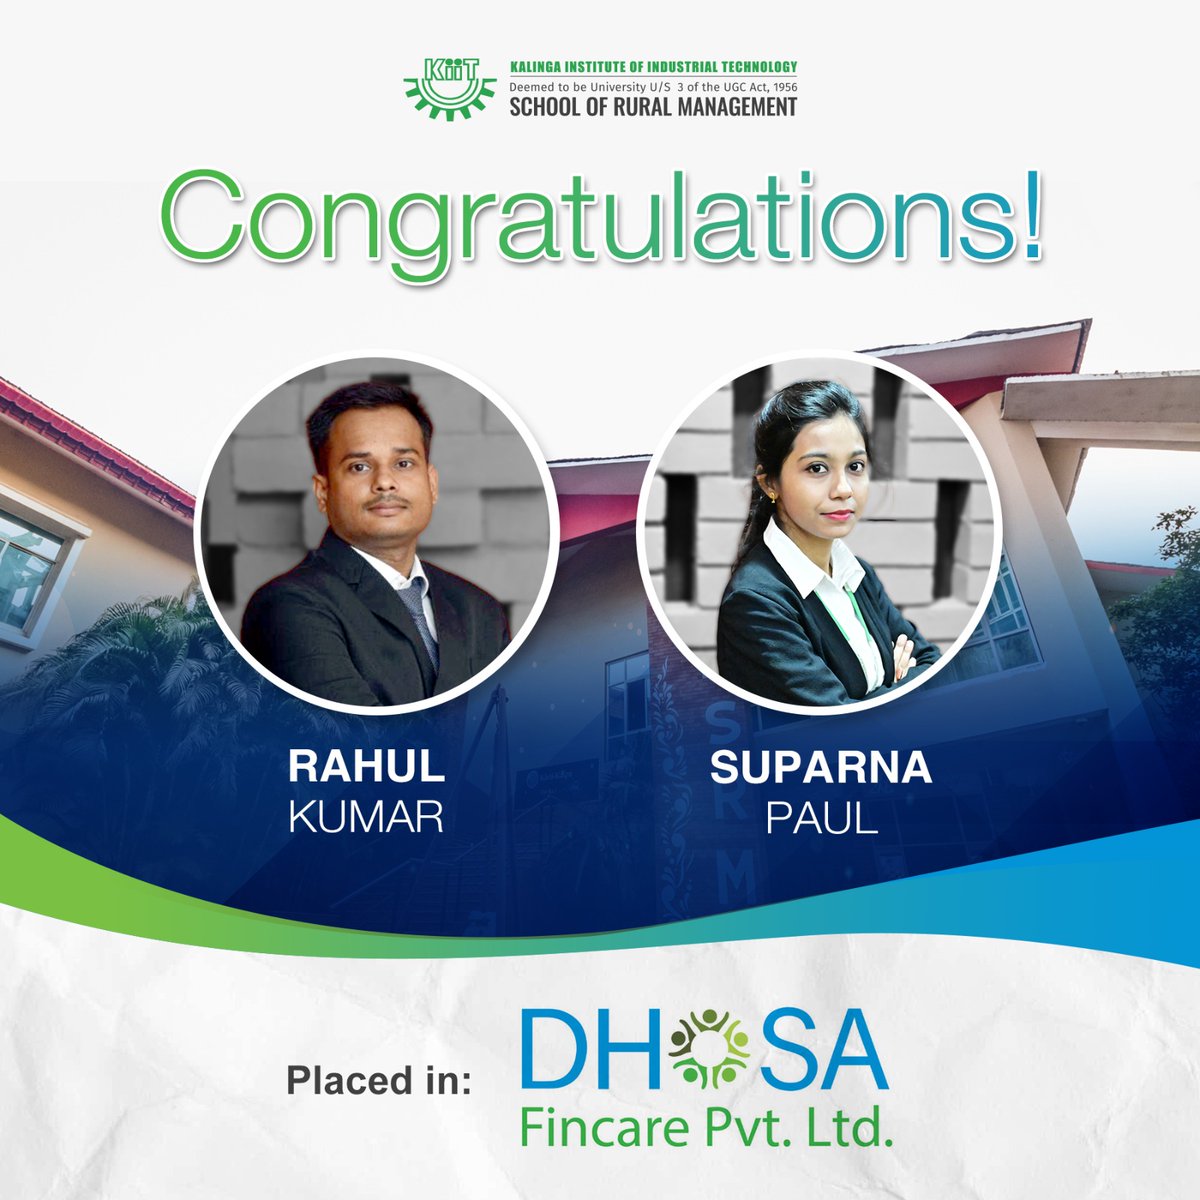 KIIT School of Rural Management's impeccable placements lead its students towards new and lucrative beginnings in leading companies in India. Congratulations to our students for being selected by Dhosa Fincare. We heartily congratulate you all on this new phase and wish you the